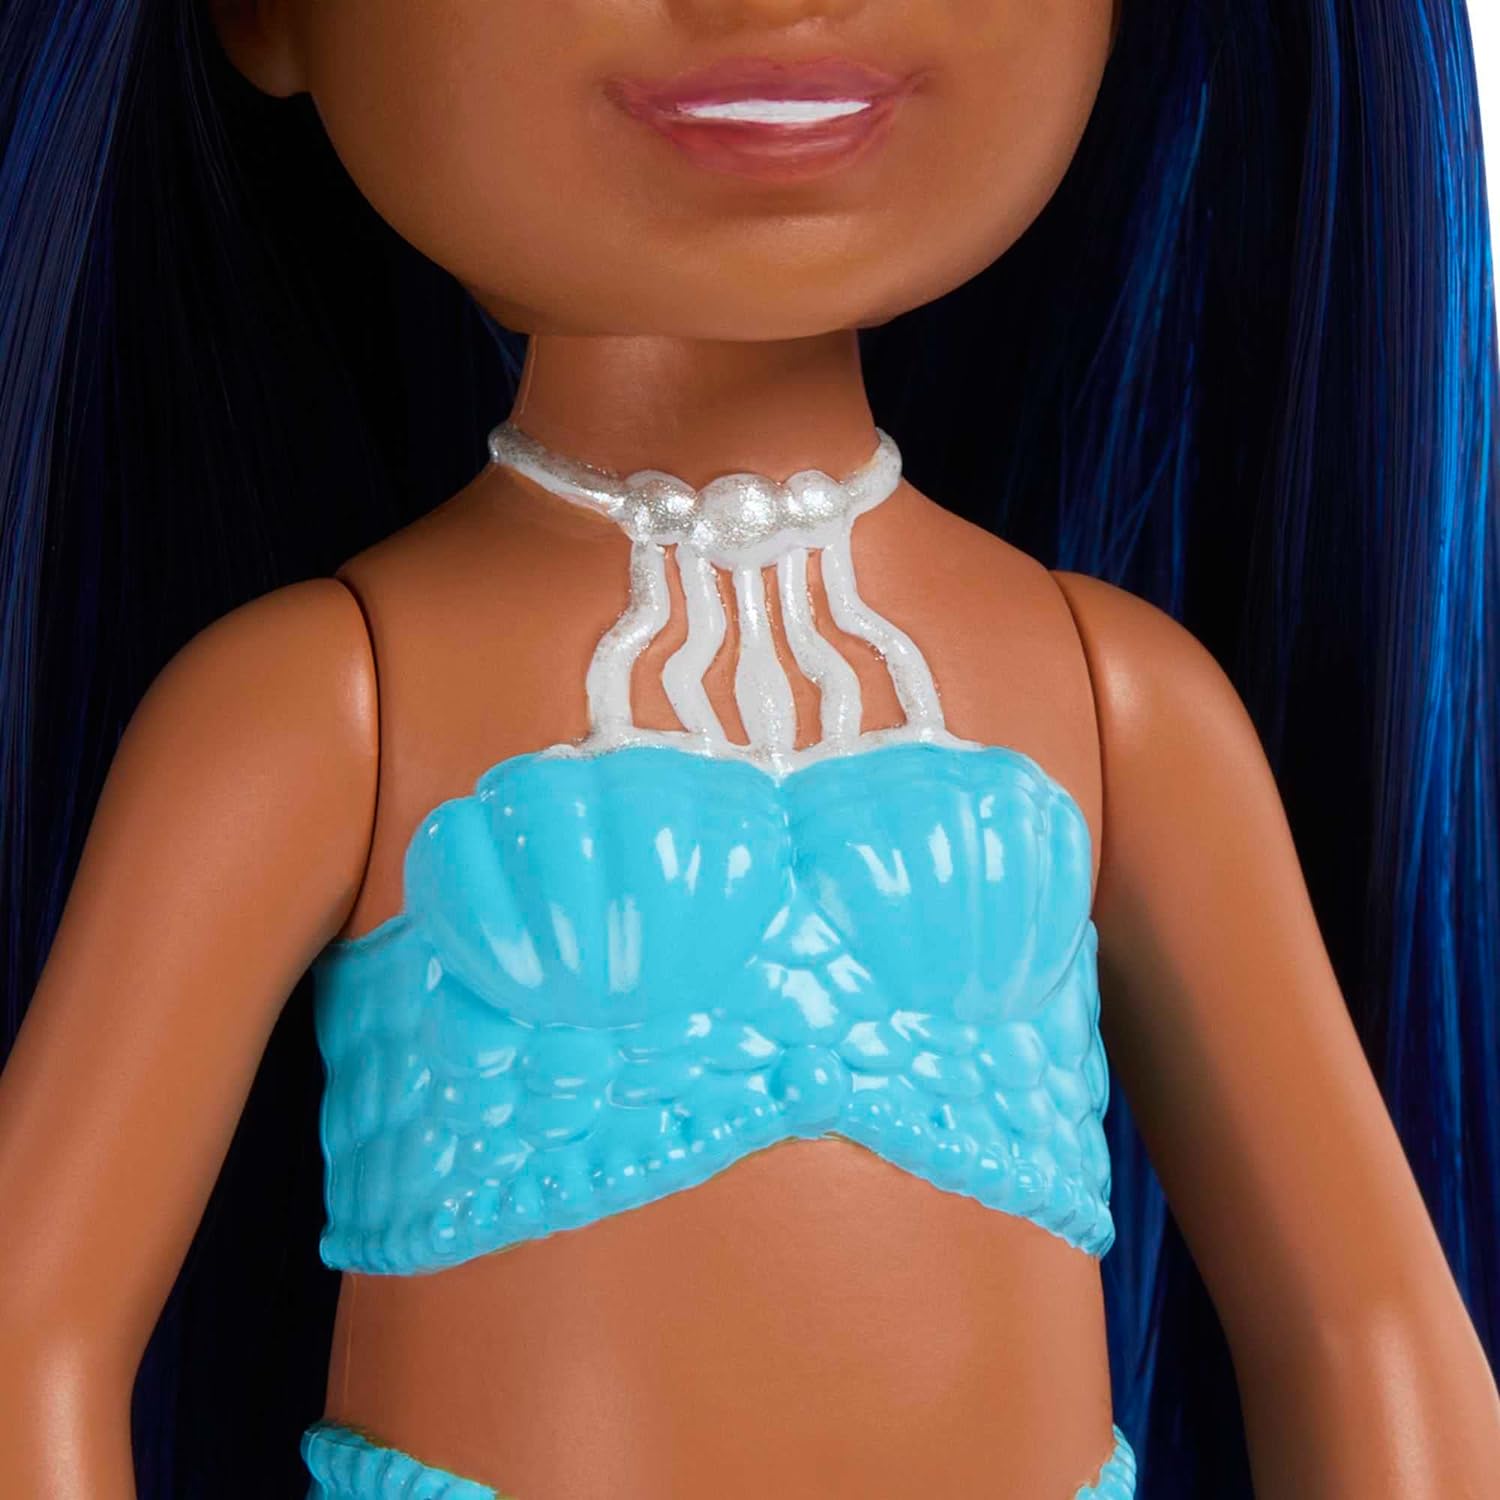 Barbie Mermaid Chelsea Doll with Midnight Blue Hair and Ombre Tail, Mermaid Toys, Crown Accessory Brand: Barbie